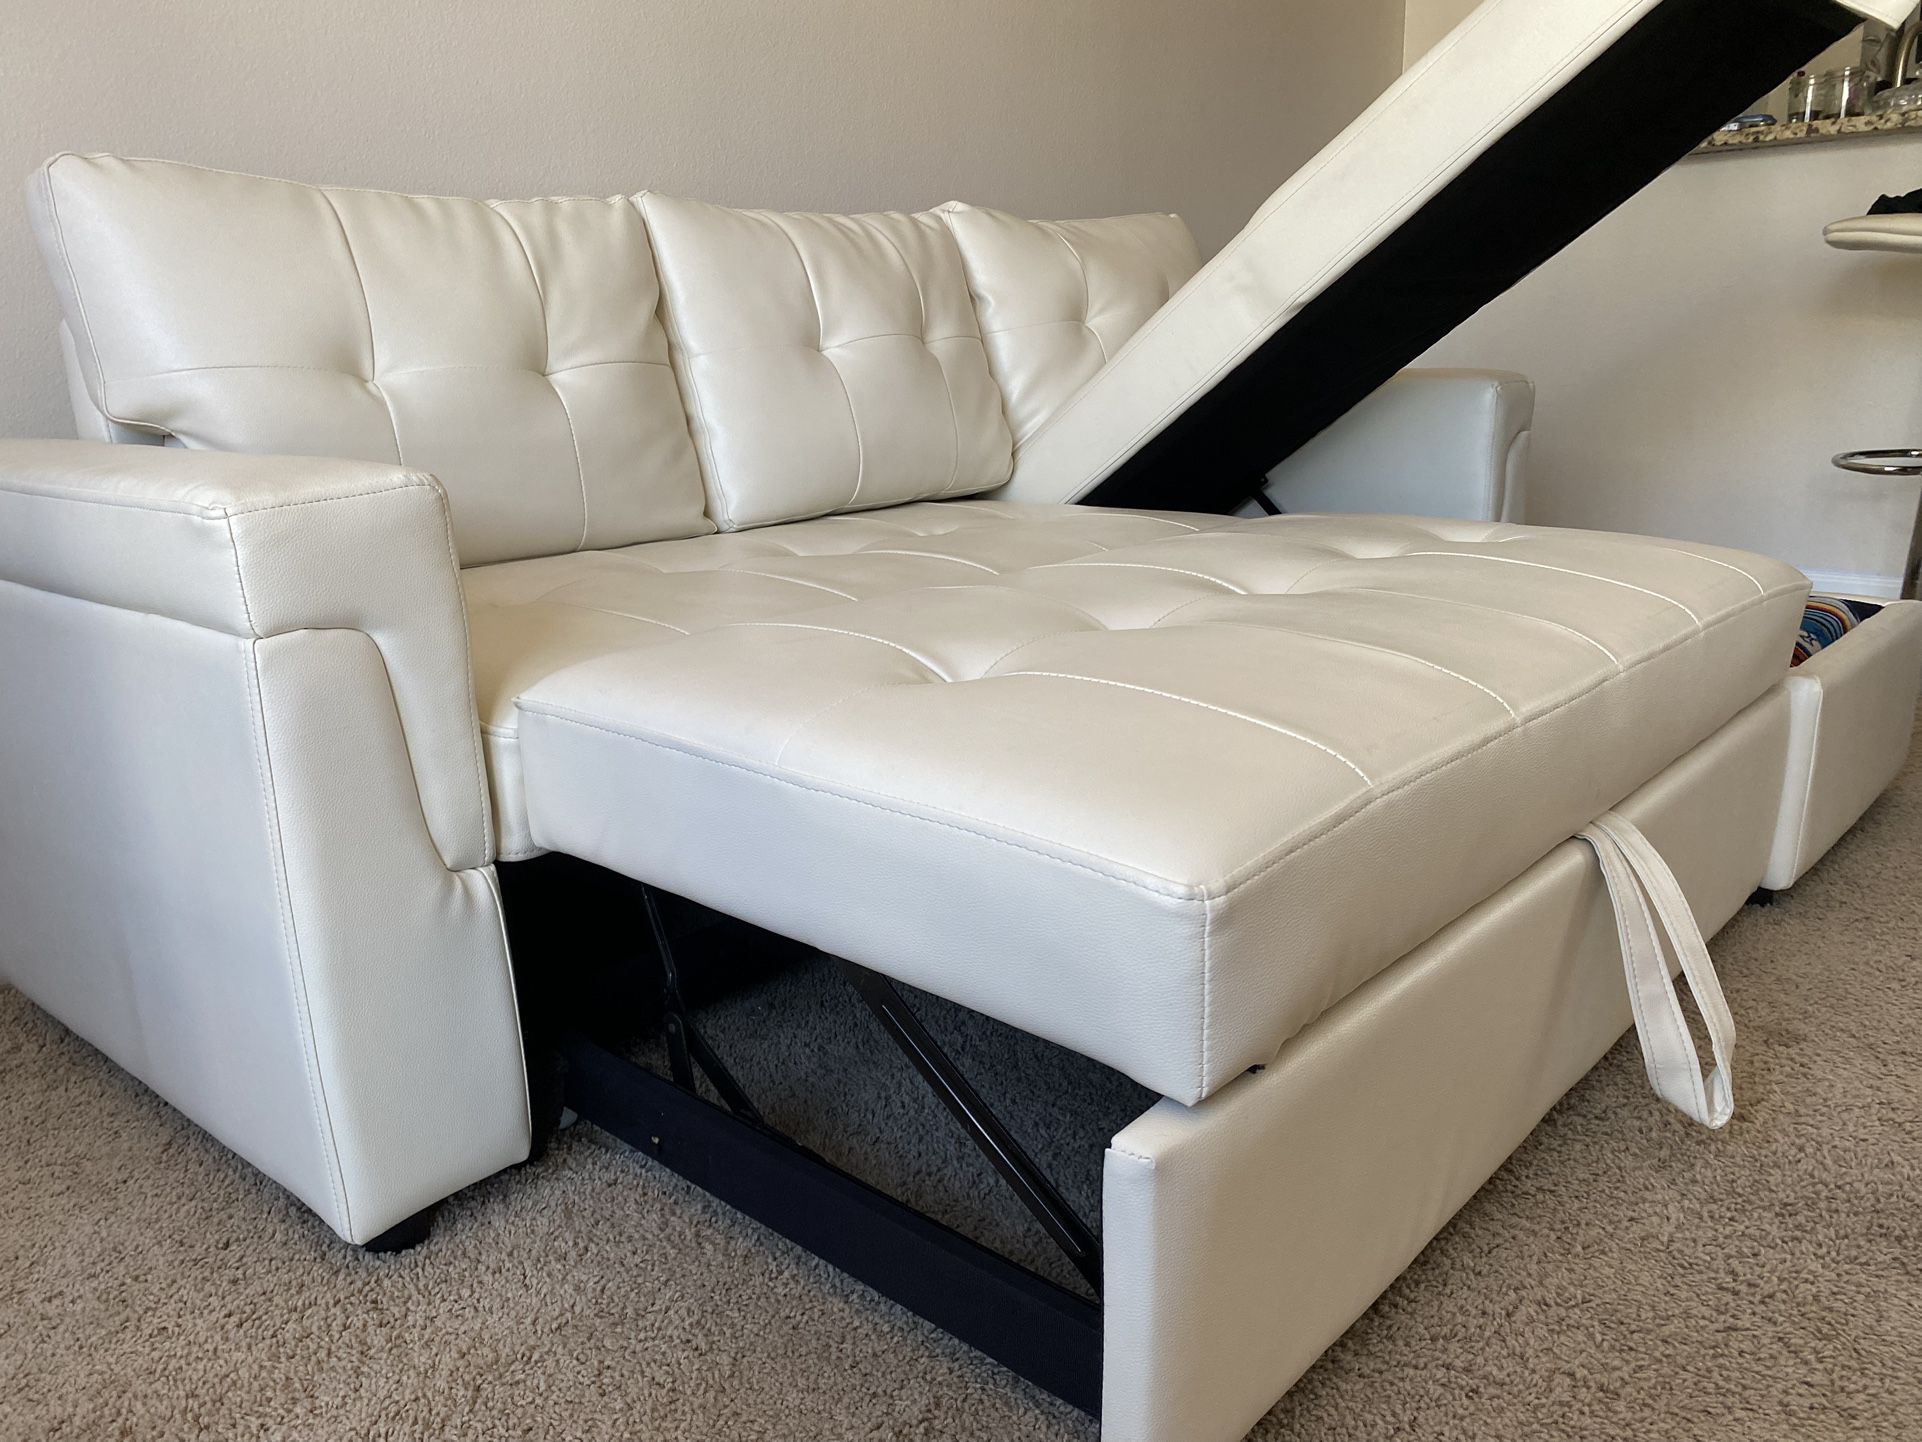 White Air Leather Couch - 6 Months Old  